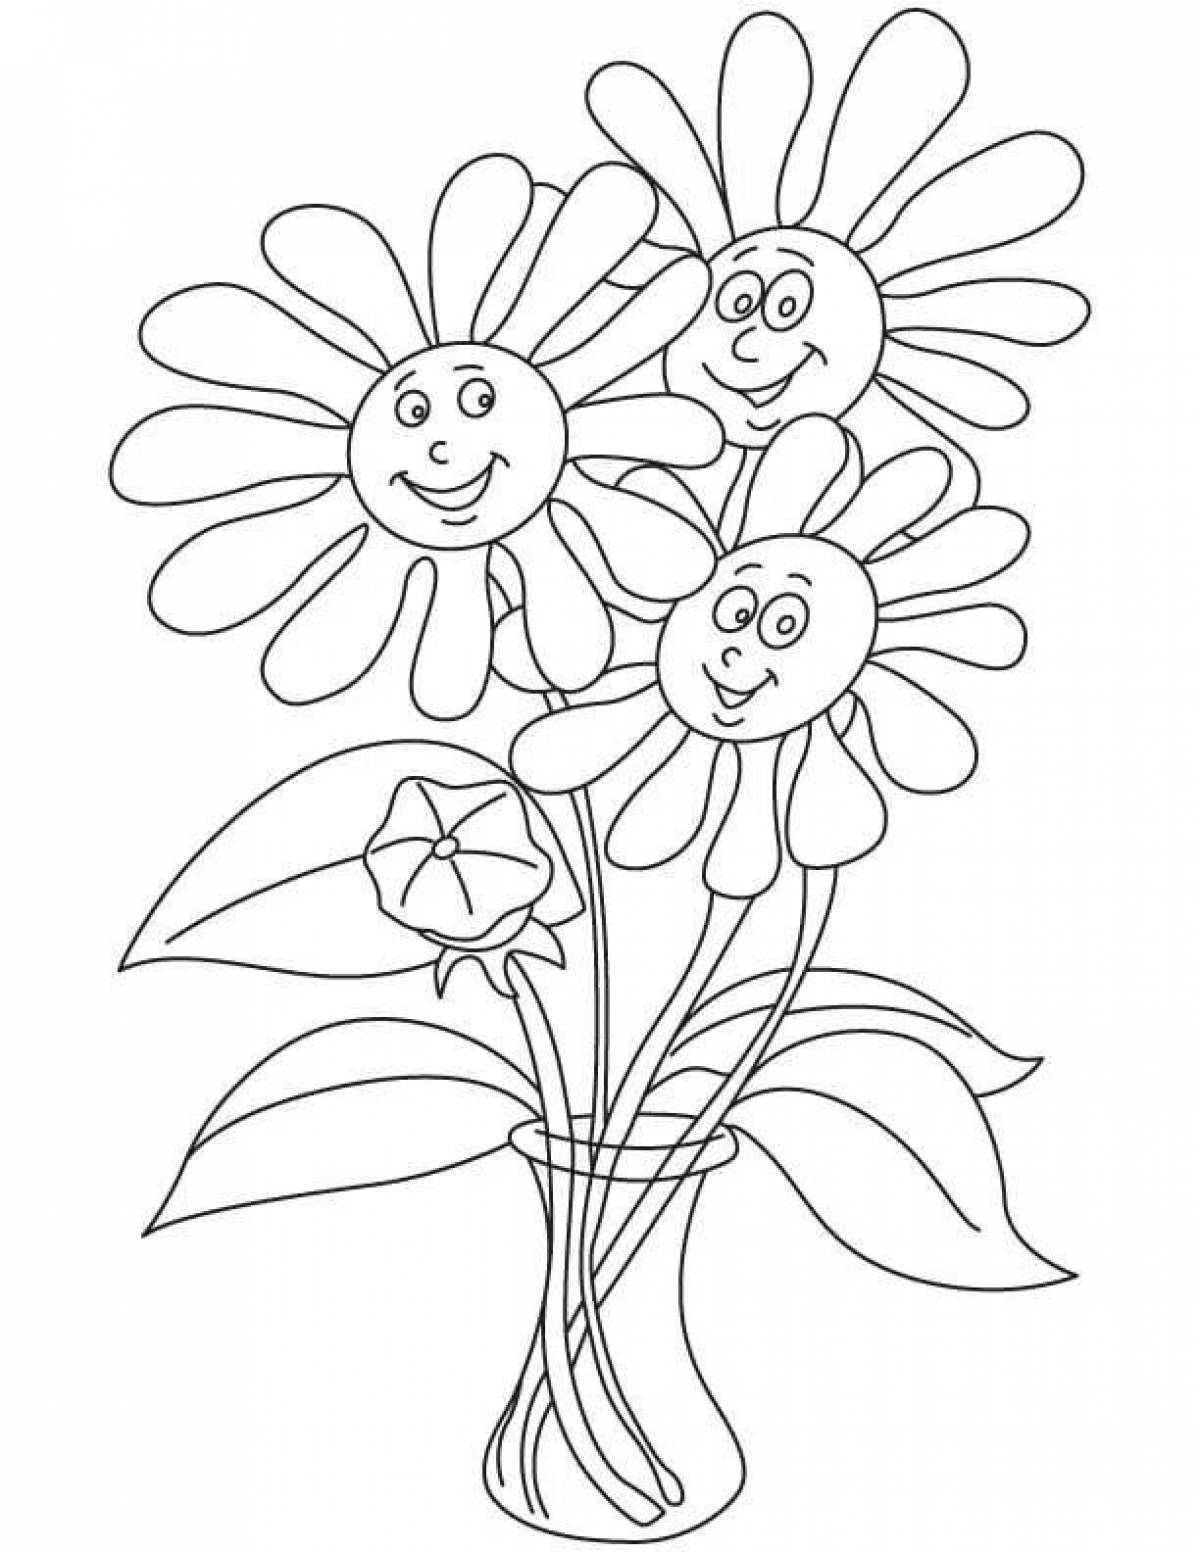 Beautifully colored coloring page with seven colors